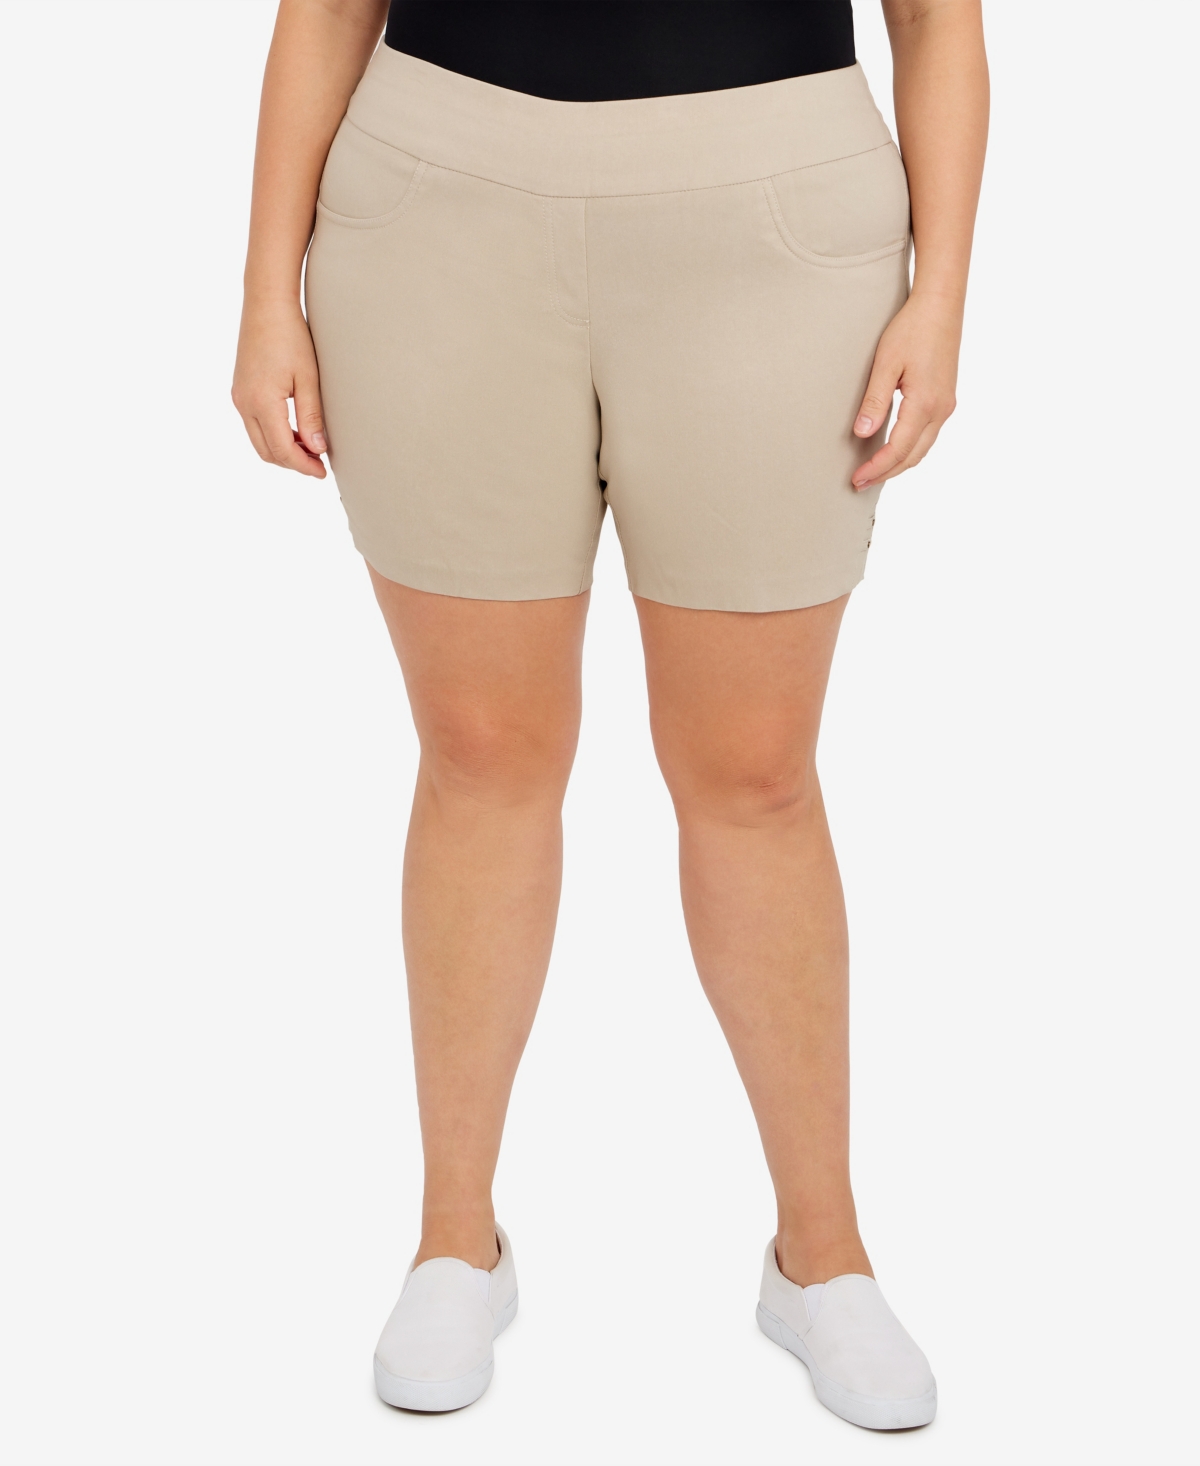 Plus Size Essentials Solid Color Tech Stretch Shorts with Elastic Waistband - Chino